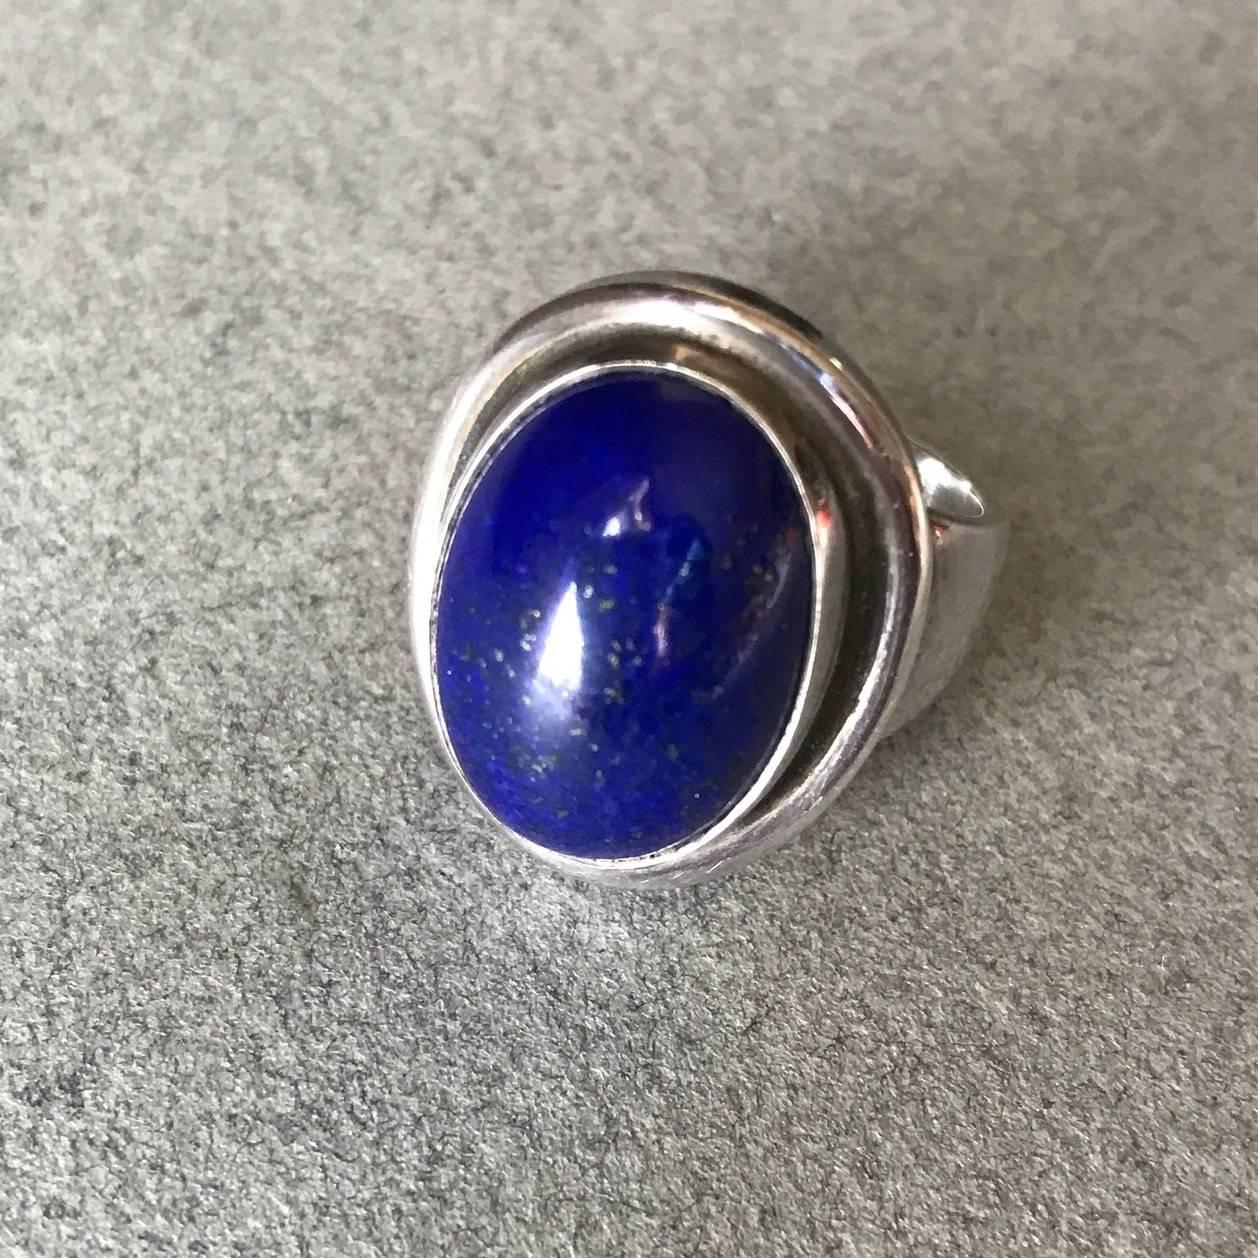 Georg Jensen Sterling Silver Lapis Lazuli Ring No. 46A by Harald Nielsen.

 

The gemstone has a deep, rich color. Stunning sterling silver ring in excellent condition.

 

Designer:Harald Nielsen Maker:Georg Jensen Design #:46A Circa:post 1945